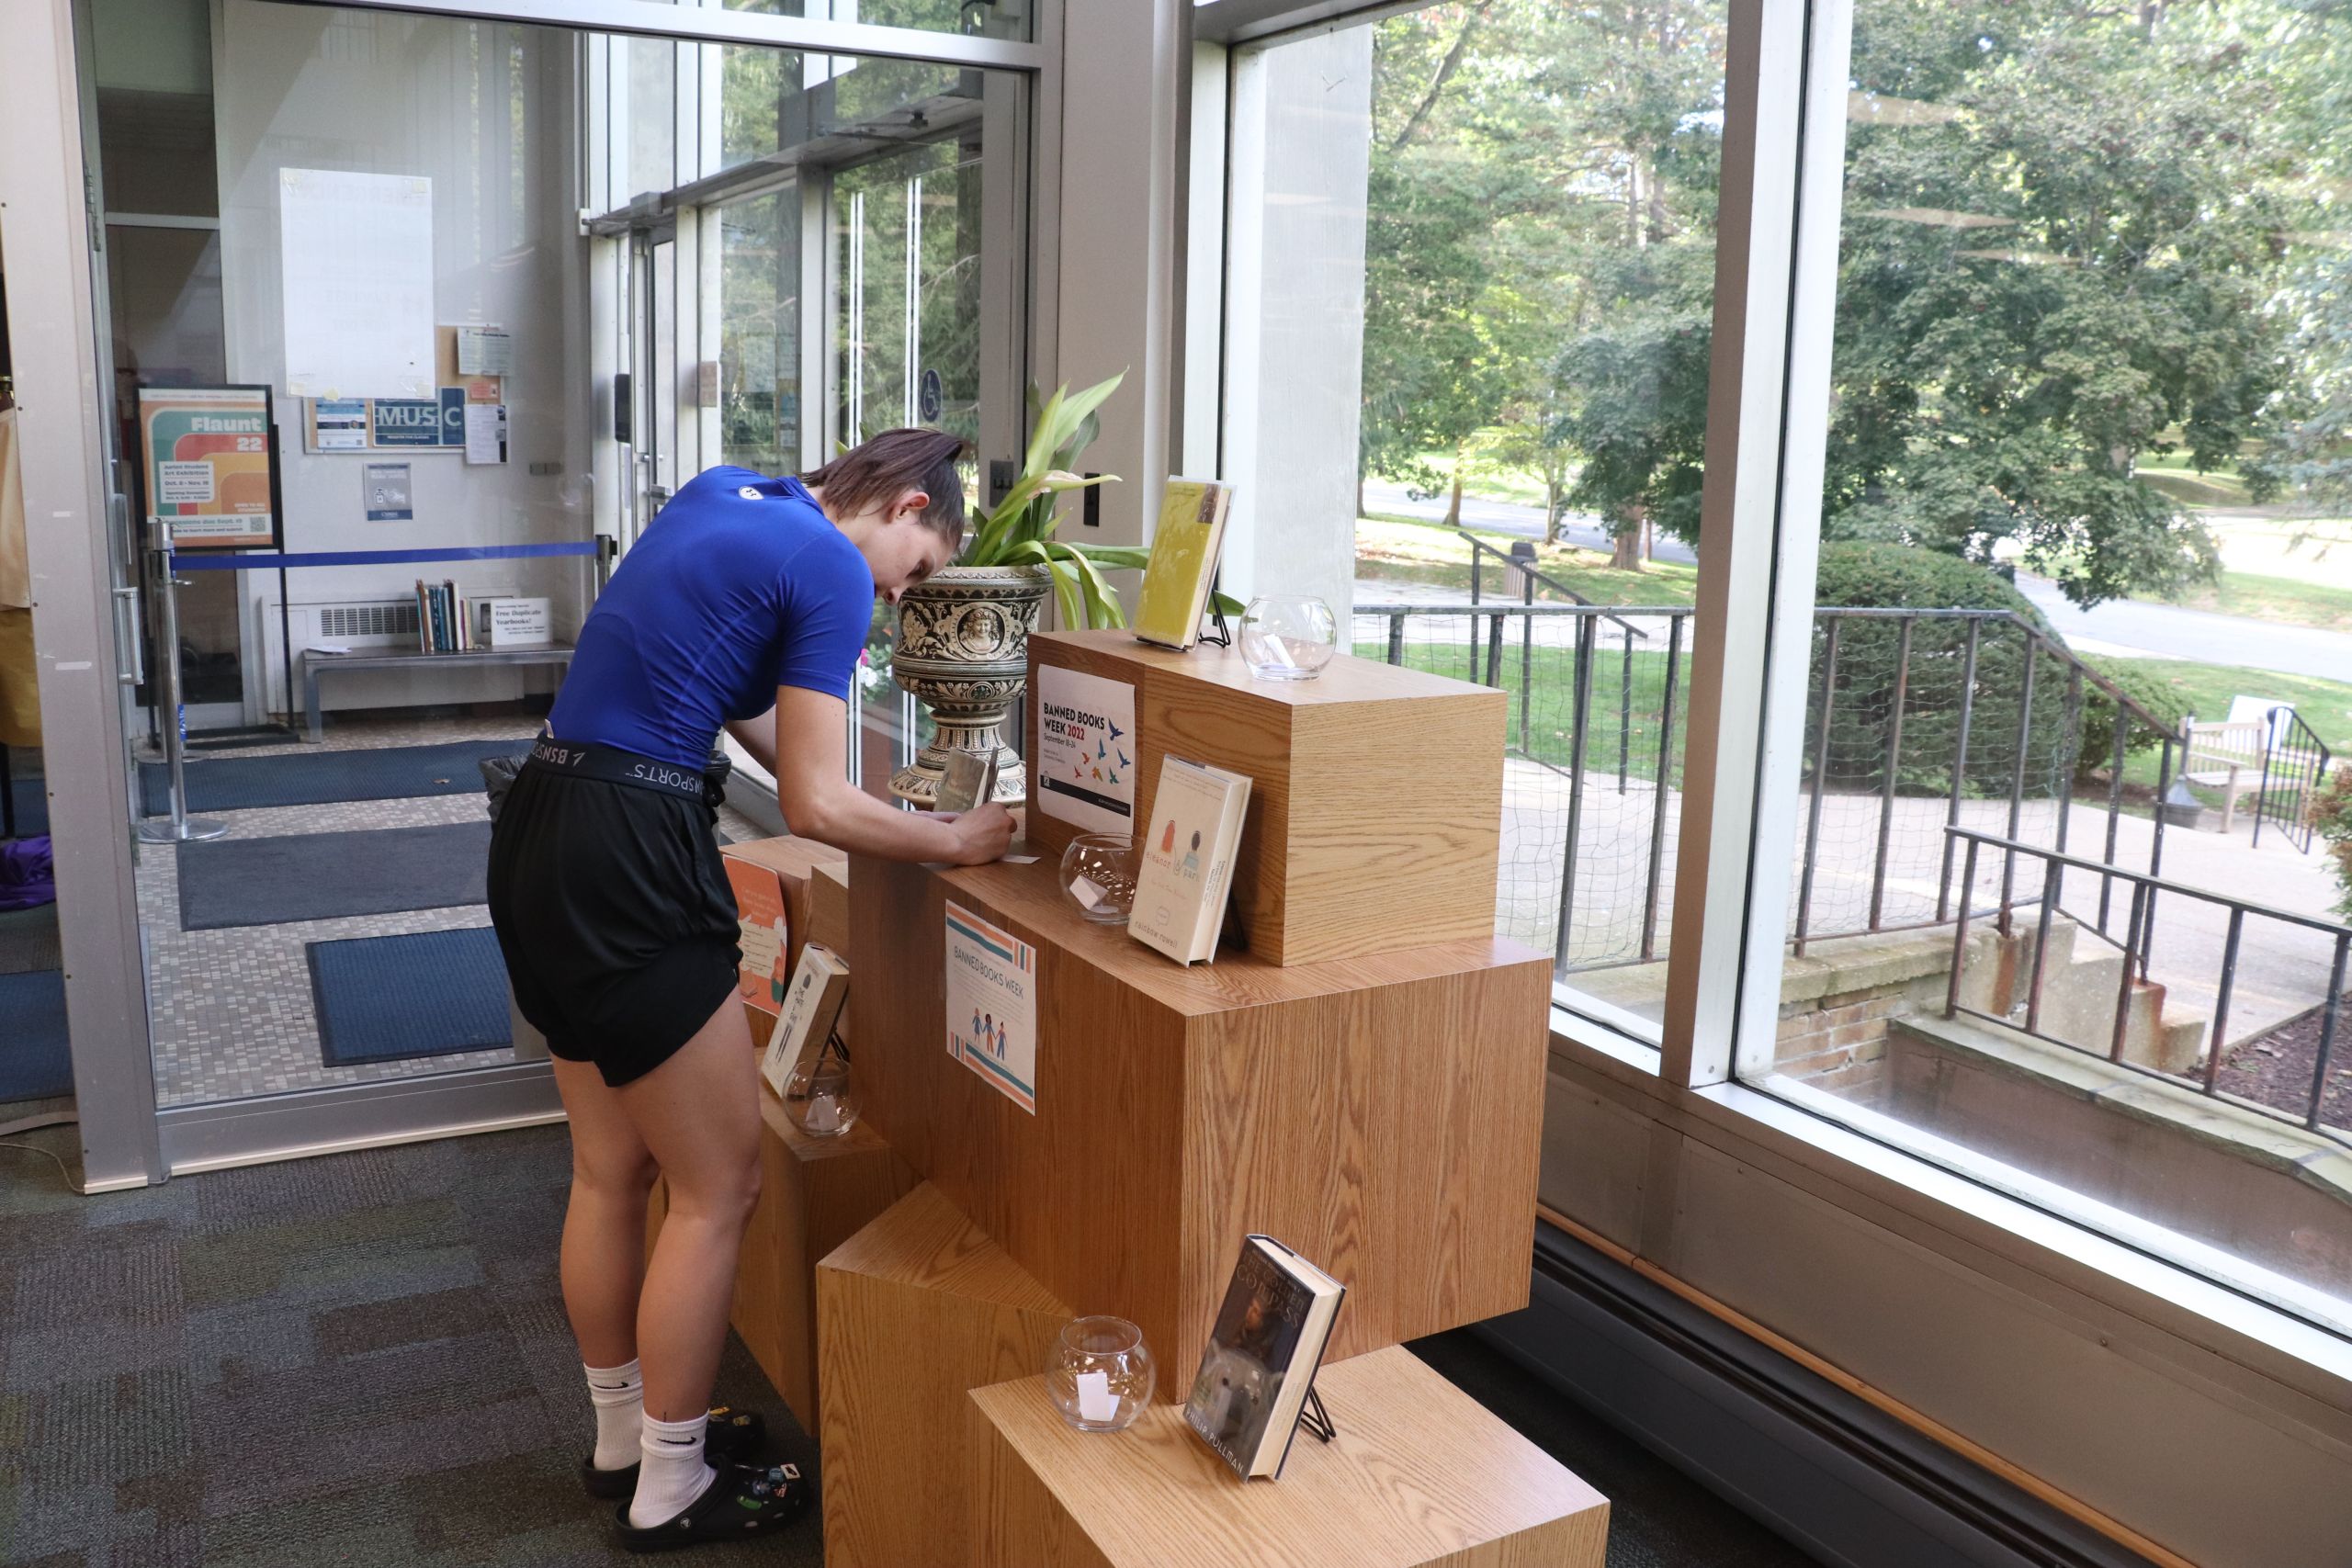 Miranda Liebtag, senior psychology major, at the library's Banned Books display, guesses why each book is banned. Photo by Ryan Byars.